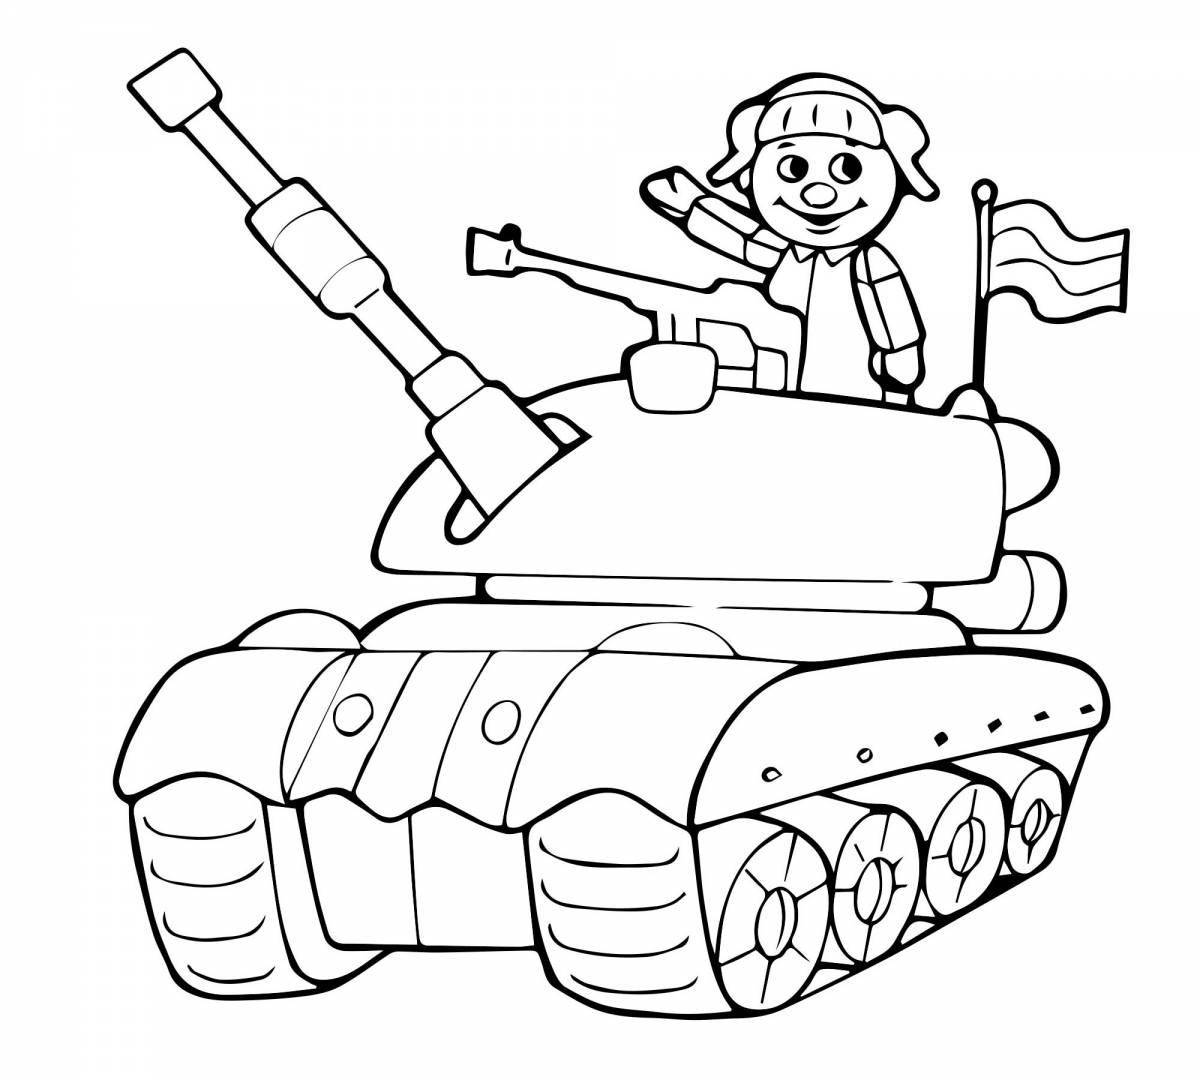 Humorous military coloring book for children 6-7 years old